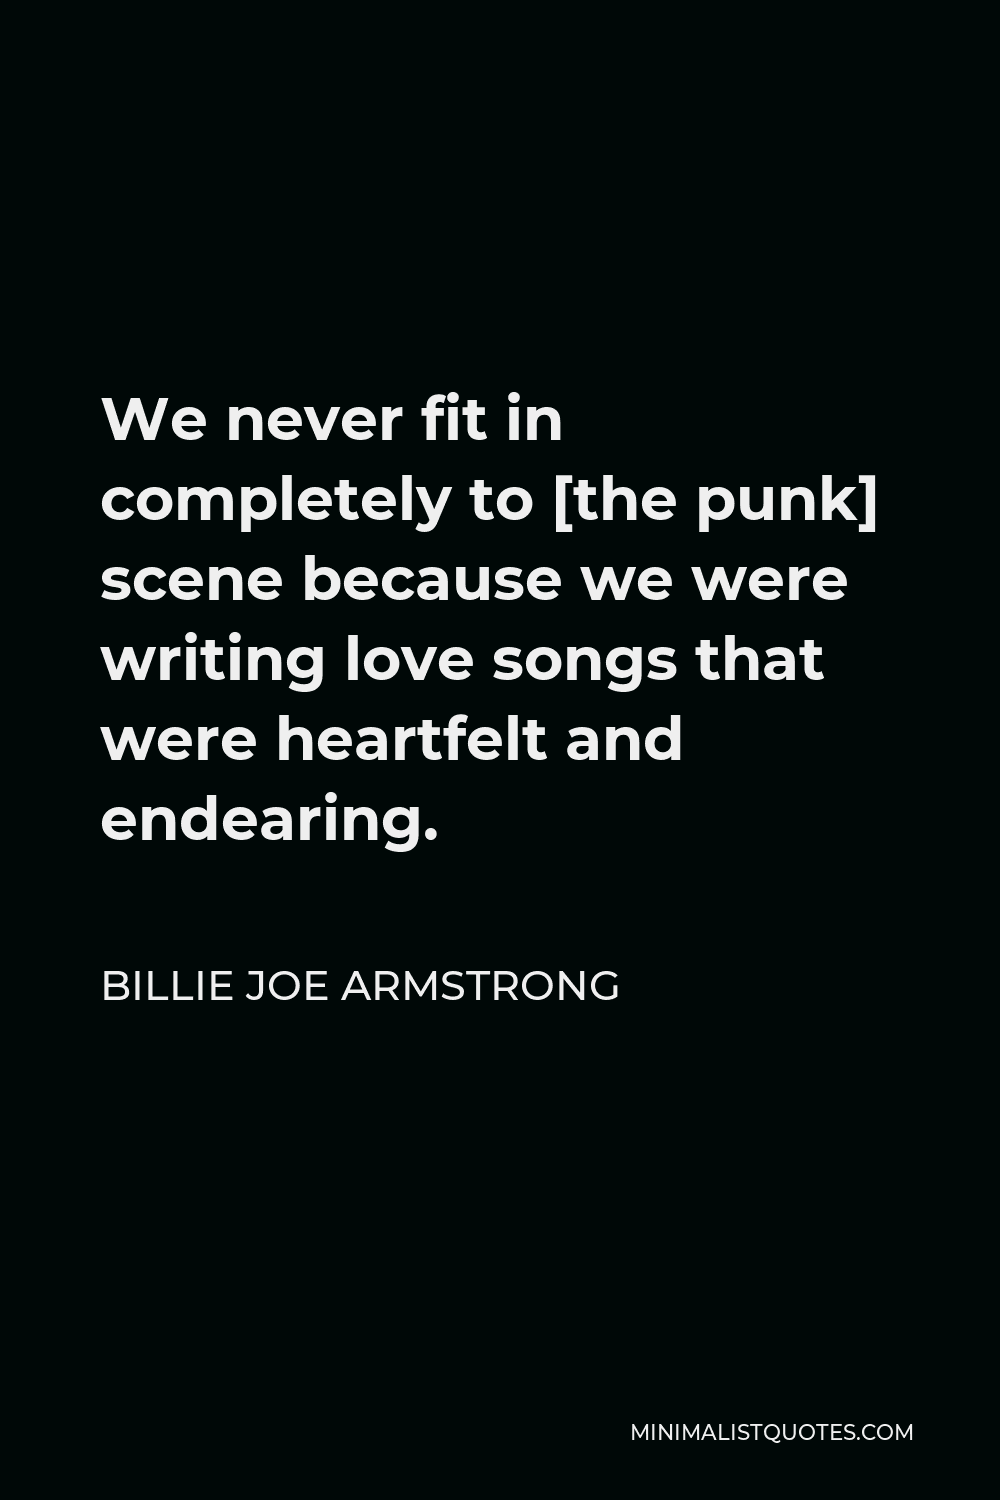 Billie Joe Armstrong Quote - We never fit in completely to [the punk] scene because we were writing love songs that were heartfelt and endearing.